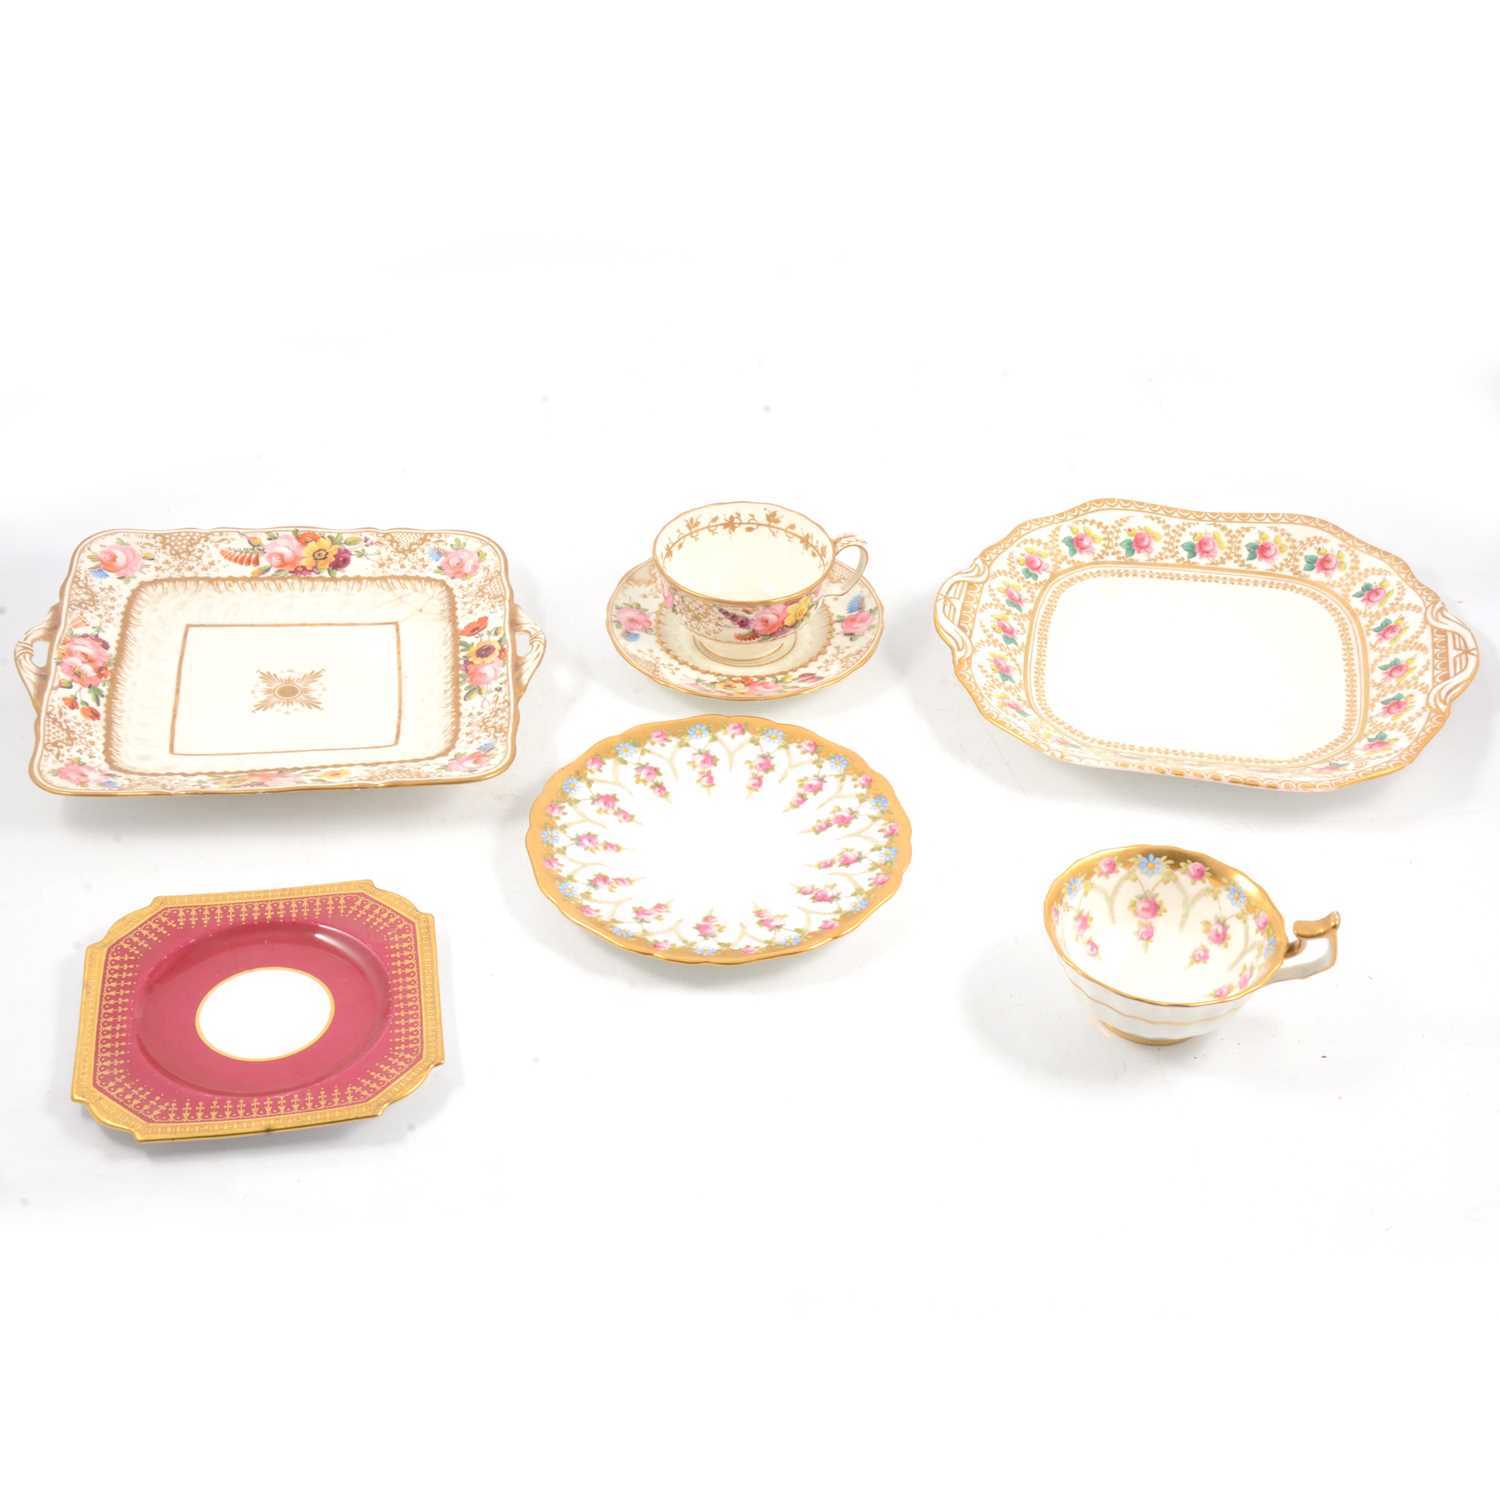 Lot 65 - Pair of T Goode & Co sandwich plates, Radford's floral trio, Belleek milk jug and other cabinet items.